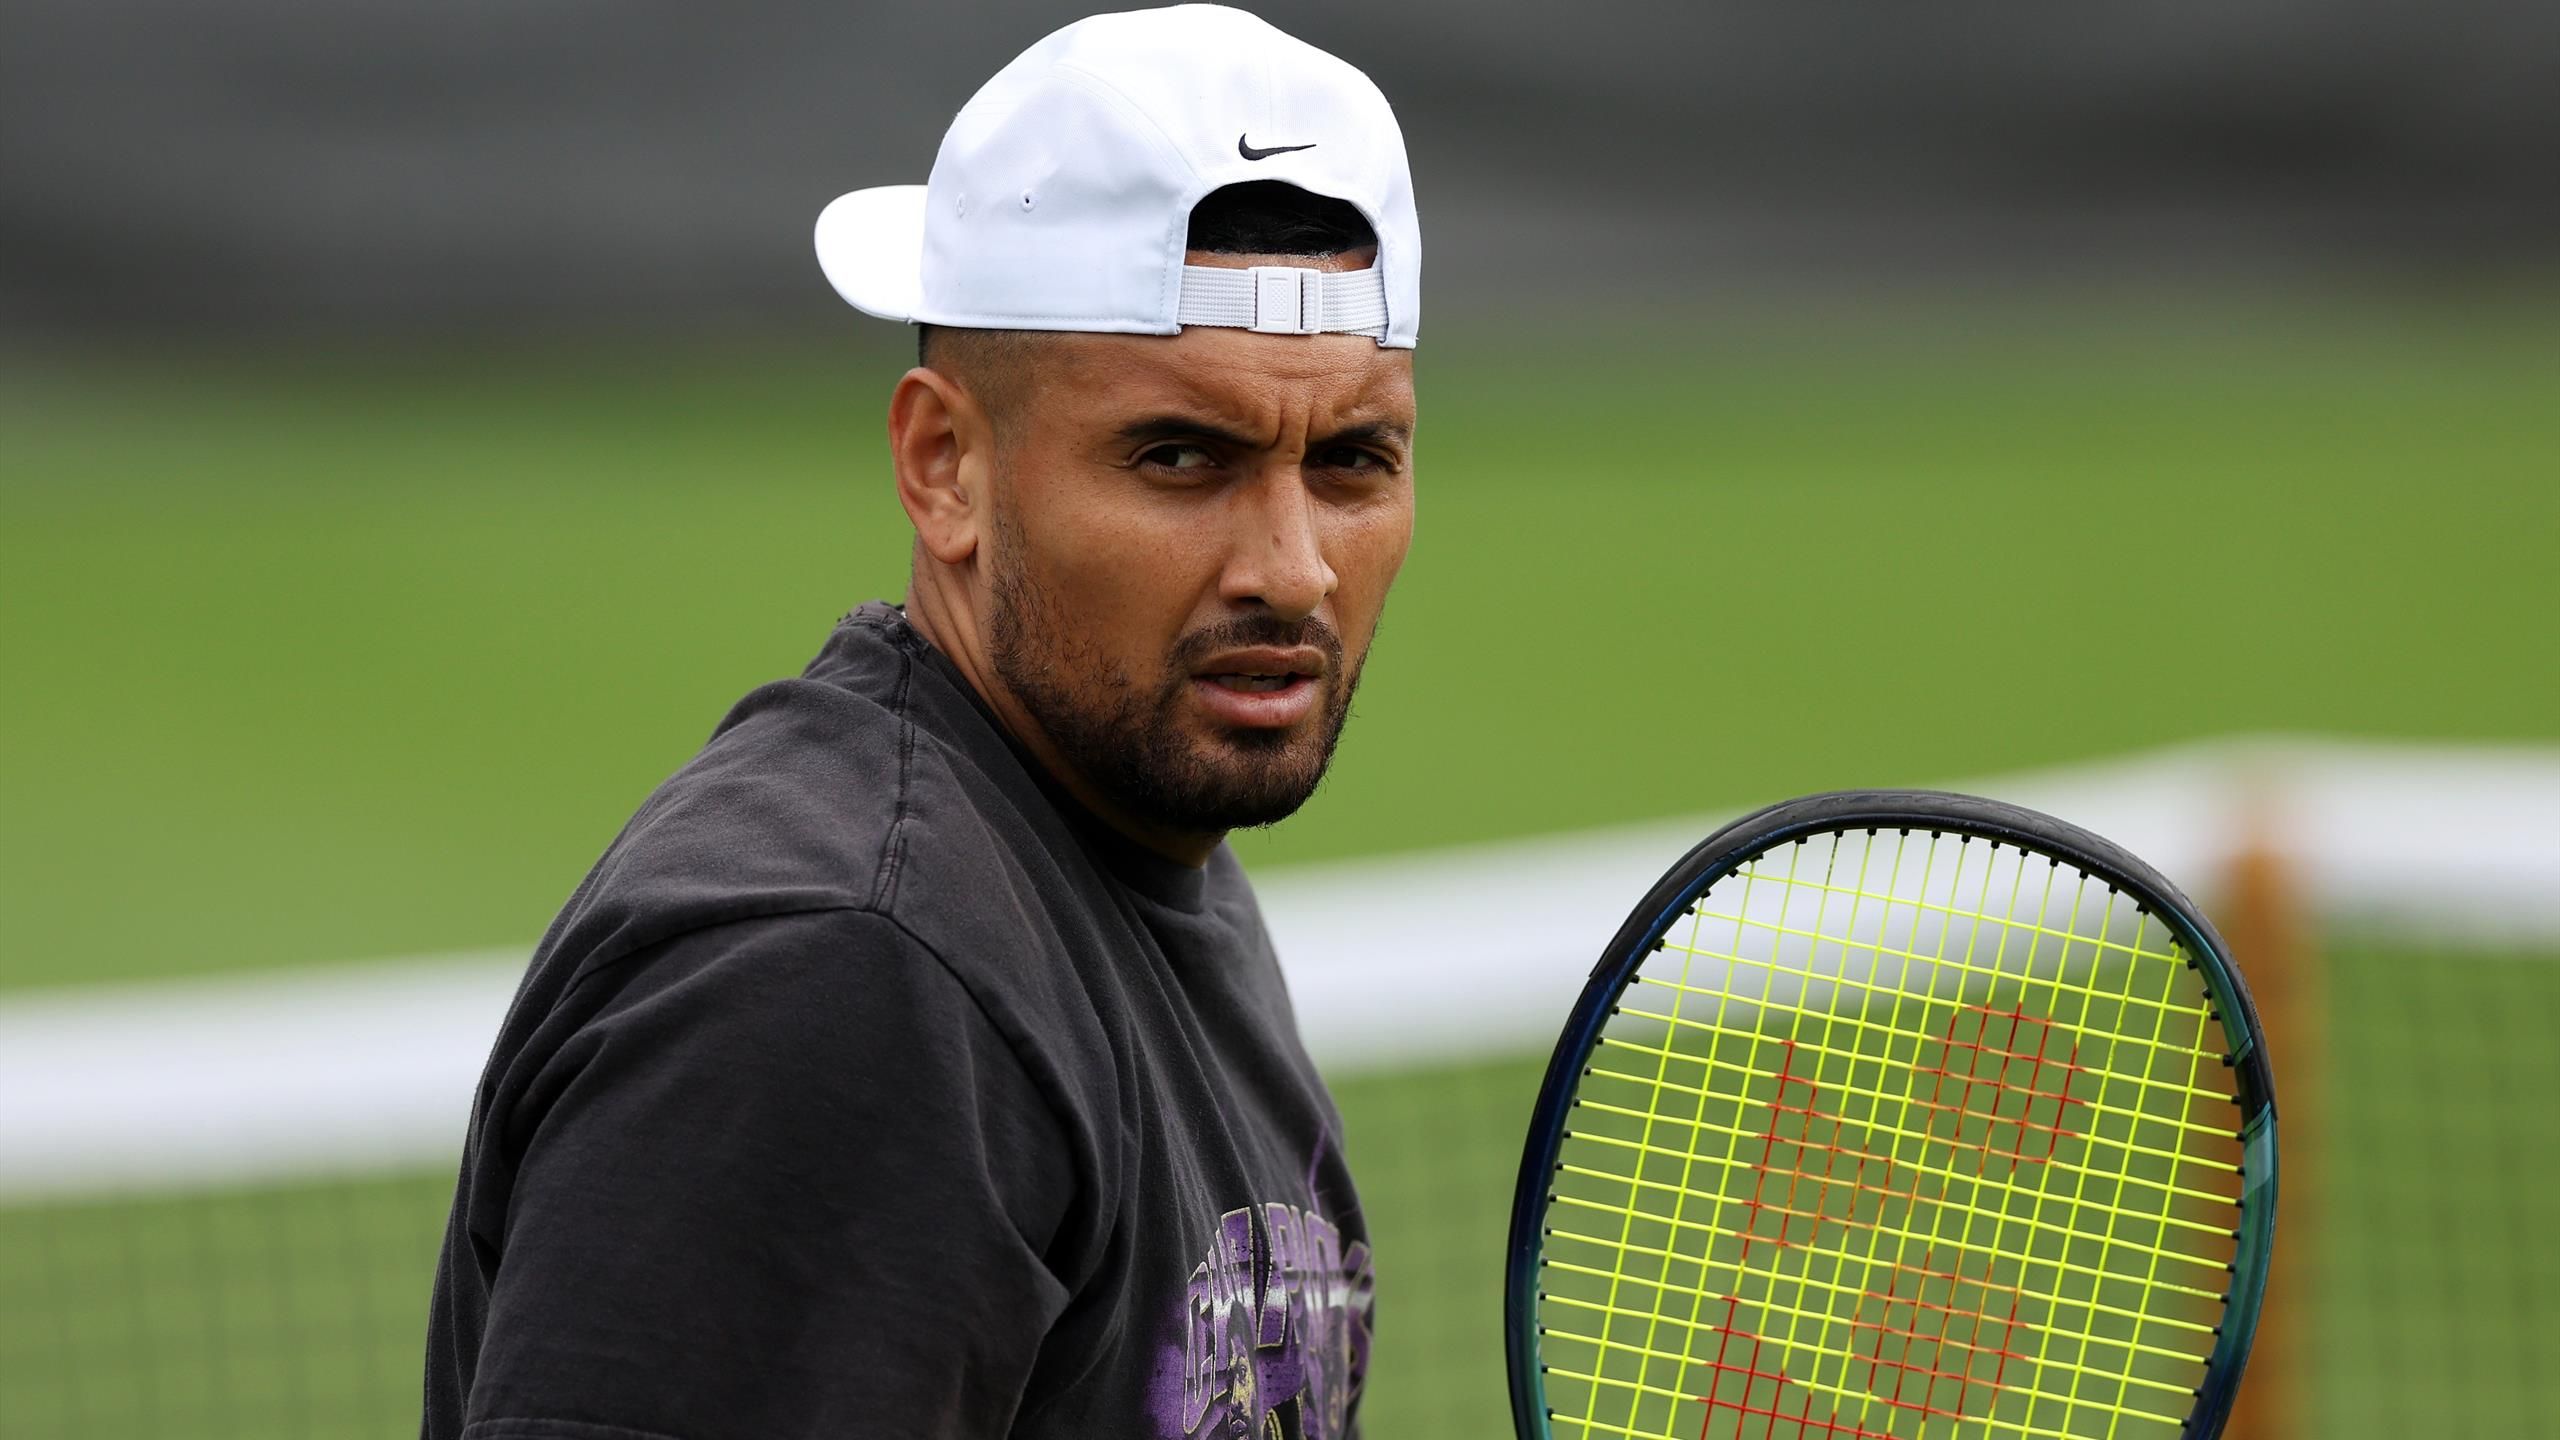 There are some question marks - Australias Nick Kyrgios admits hes not fully fit ahead of Wimbledon